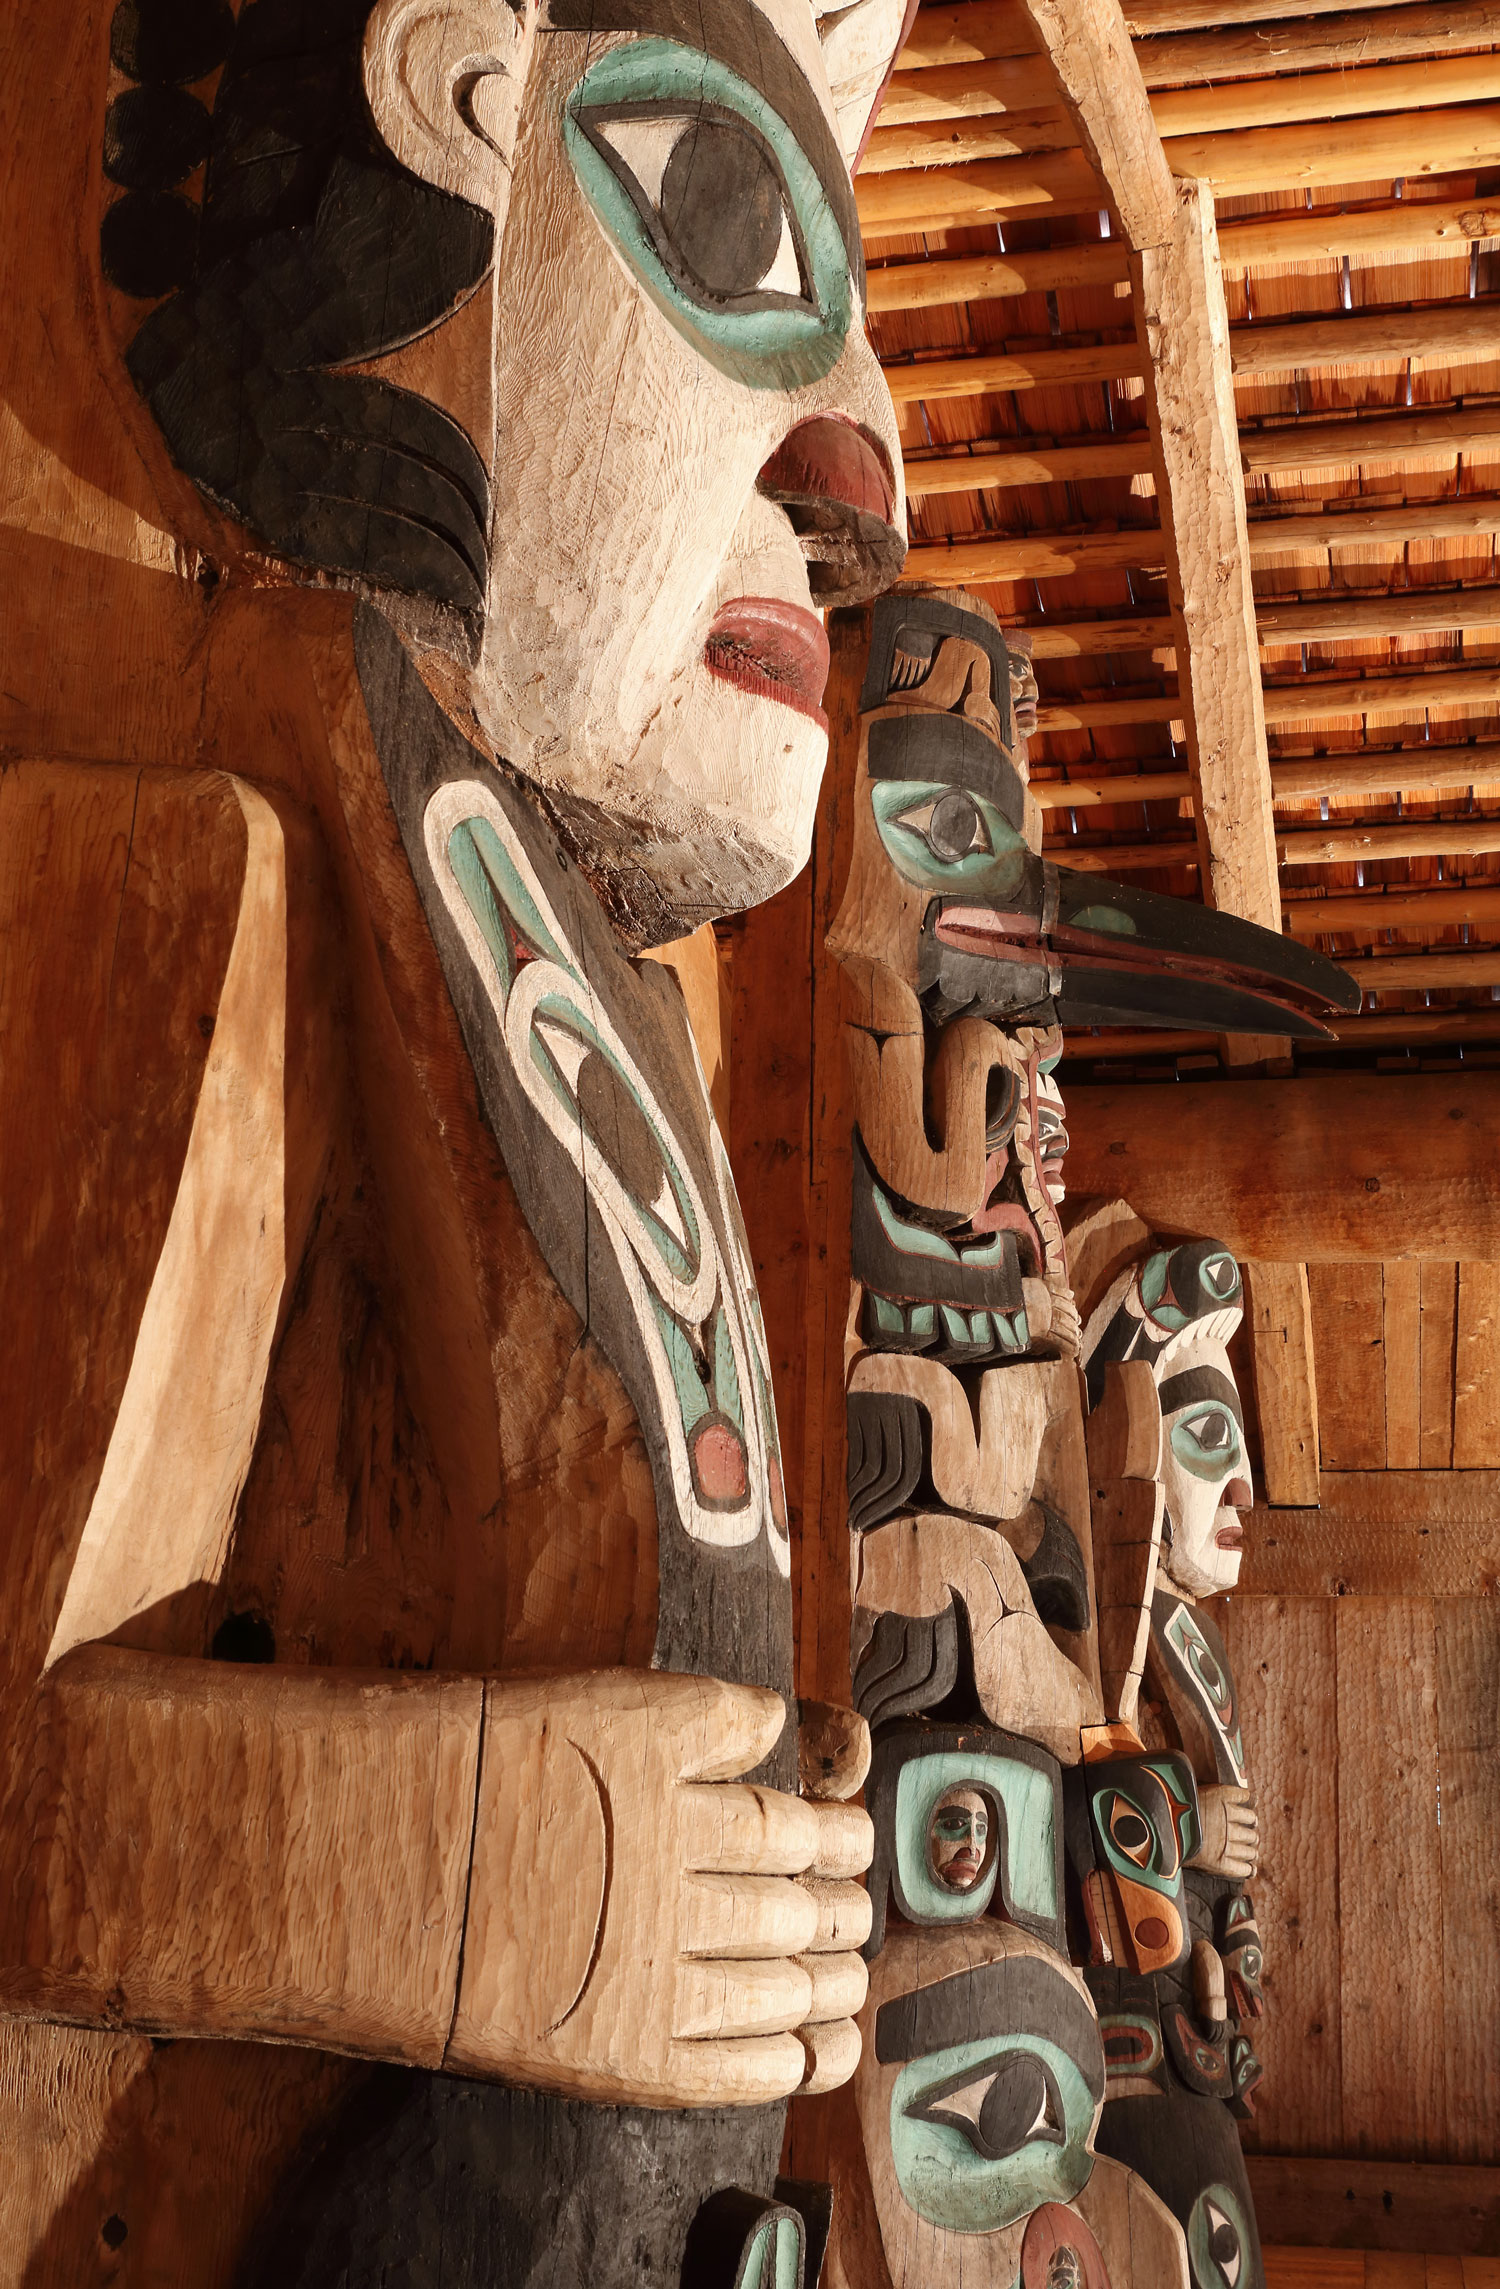 These totem poles are over a century old.